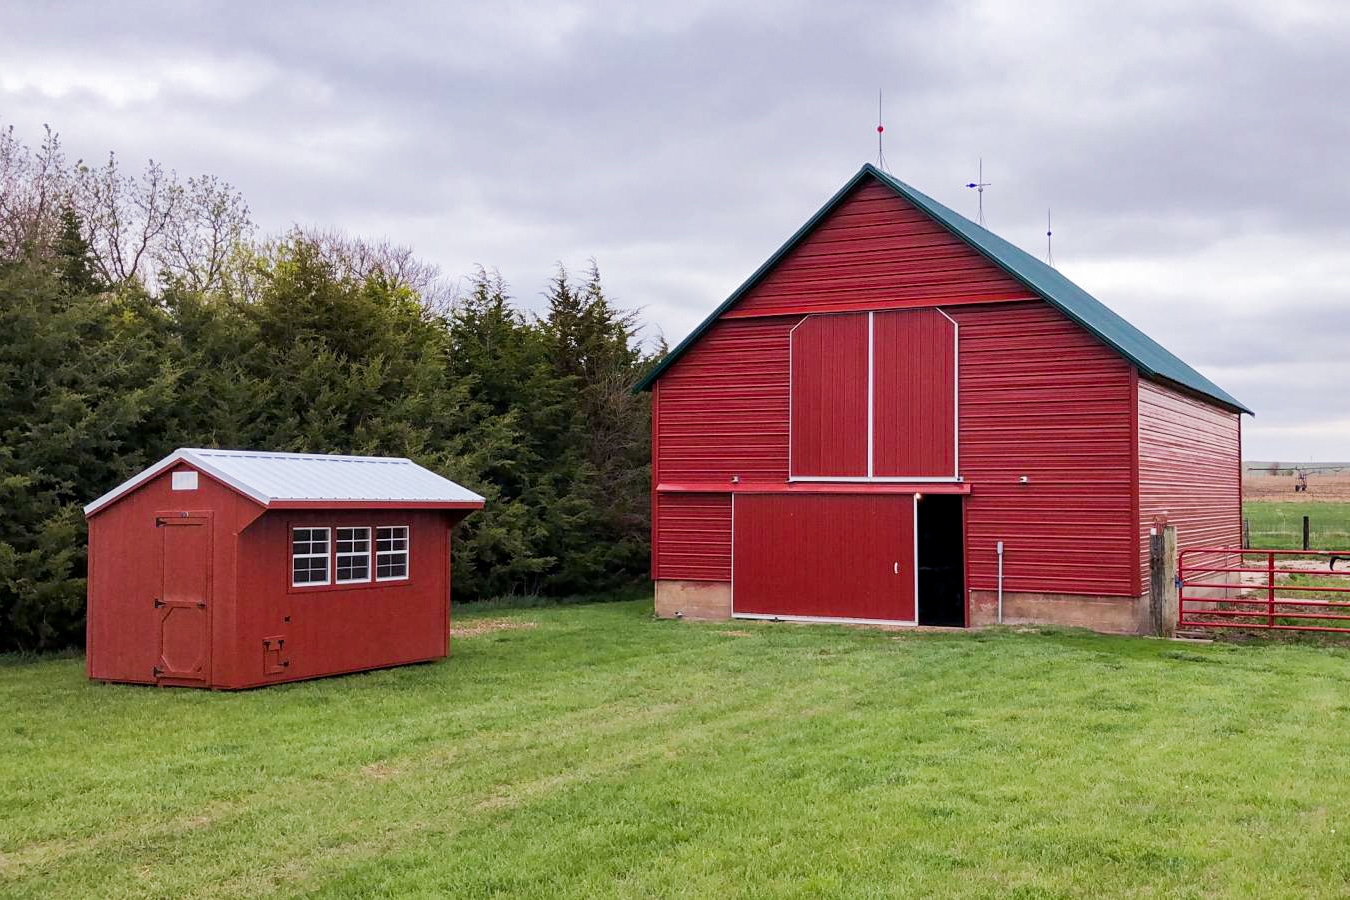 Red wooden Chicken Coop Shed next to barn